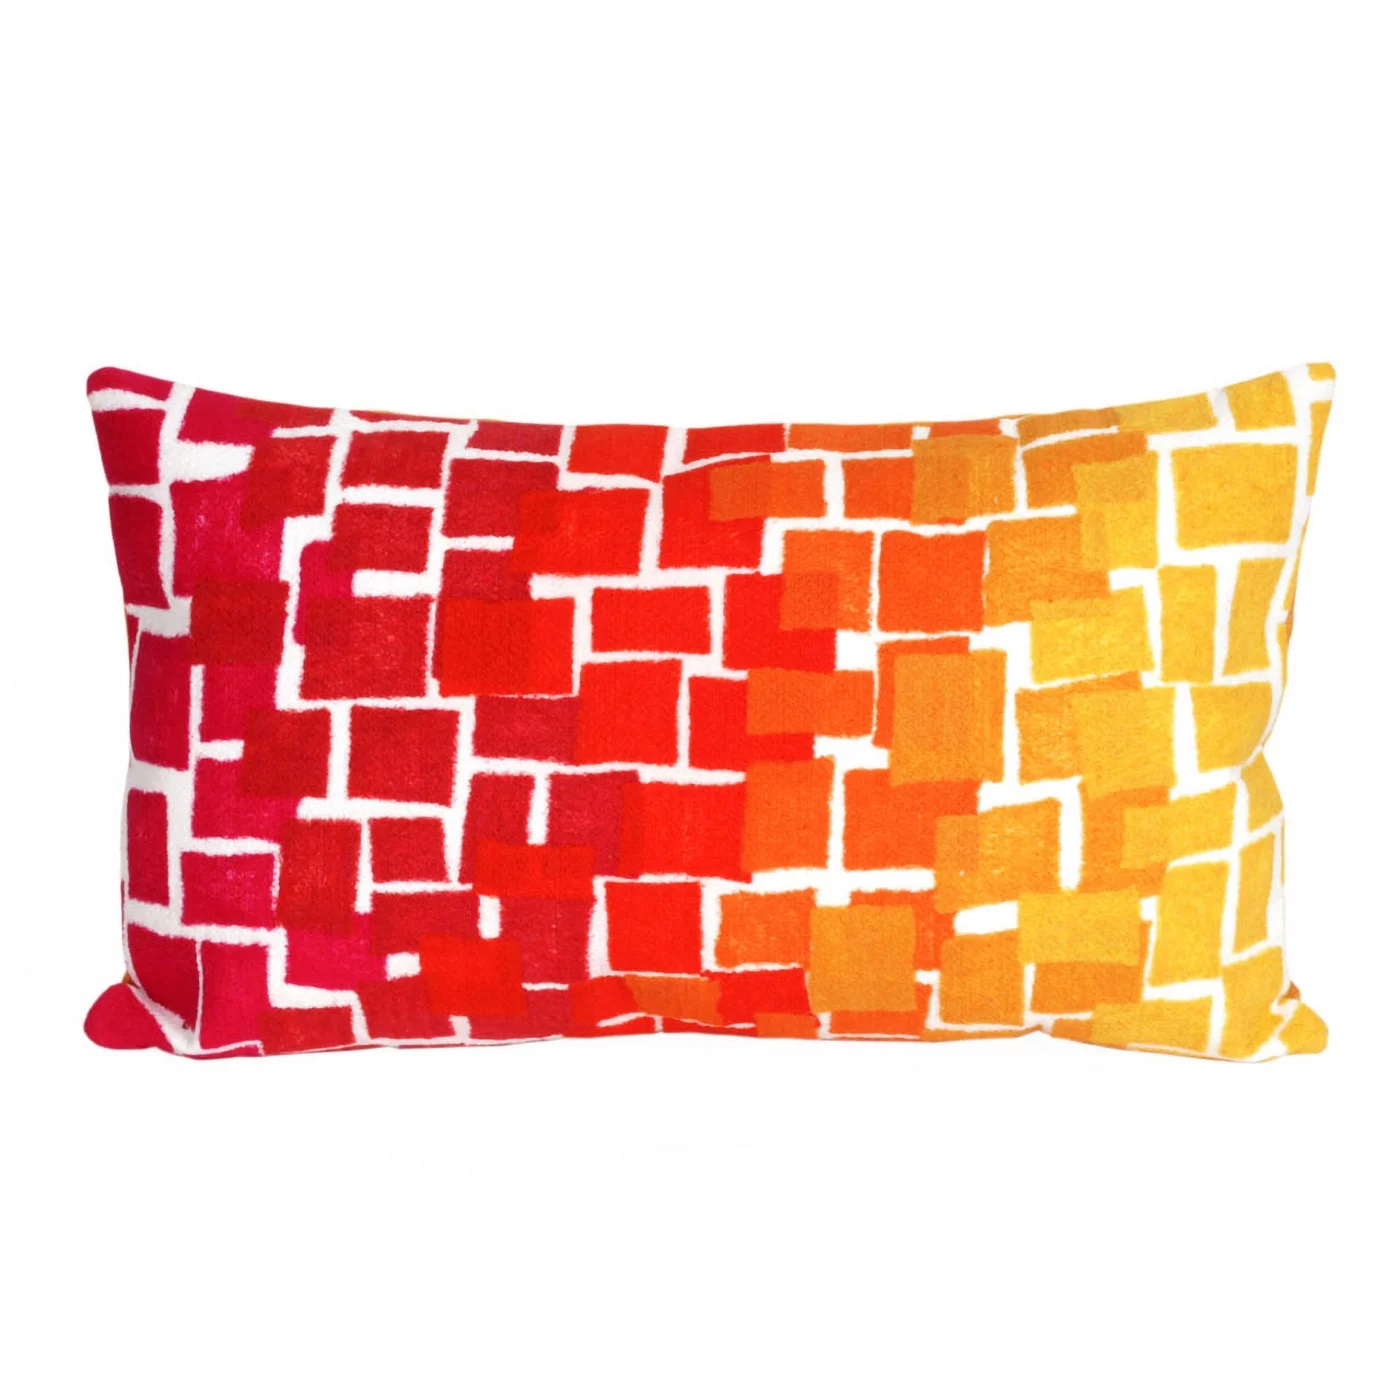 Ombre_Tile_Warm_Kidney_Pillow_orange_red_Yellow